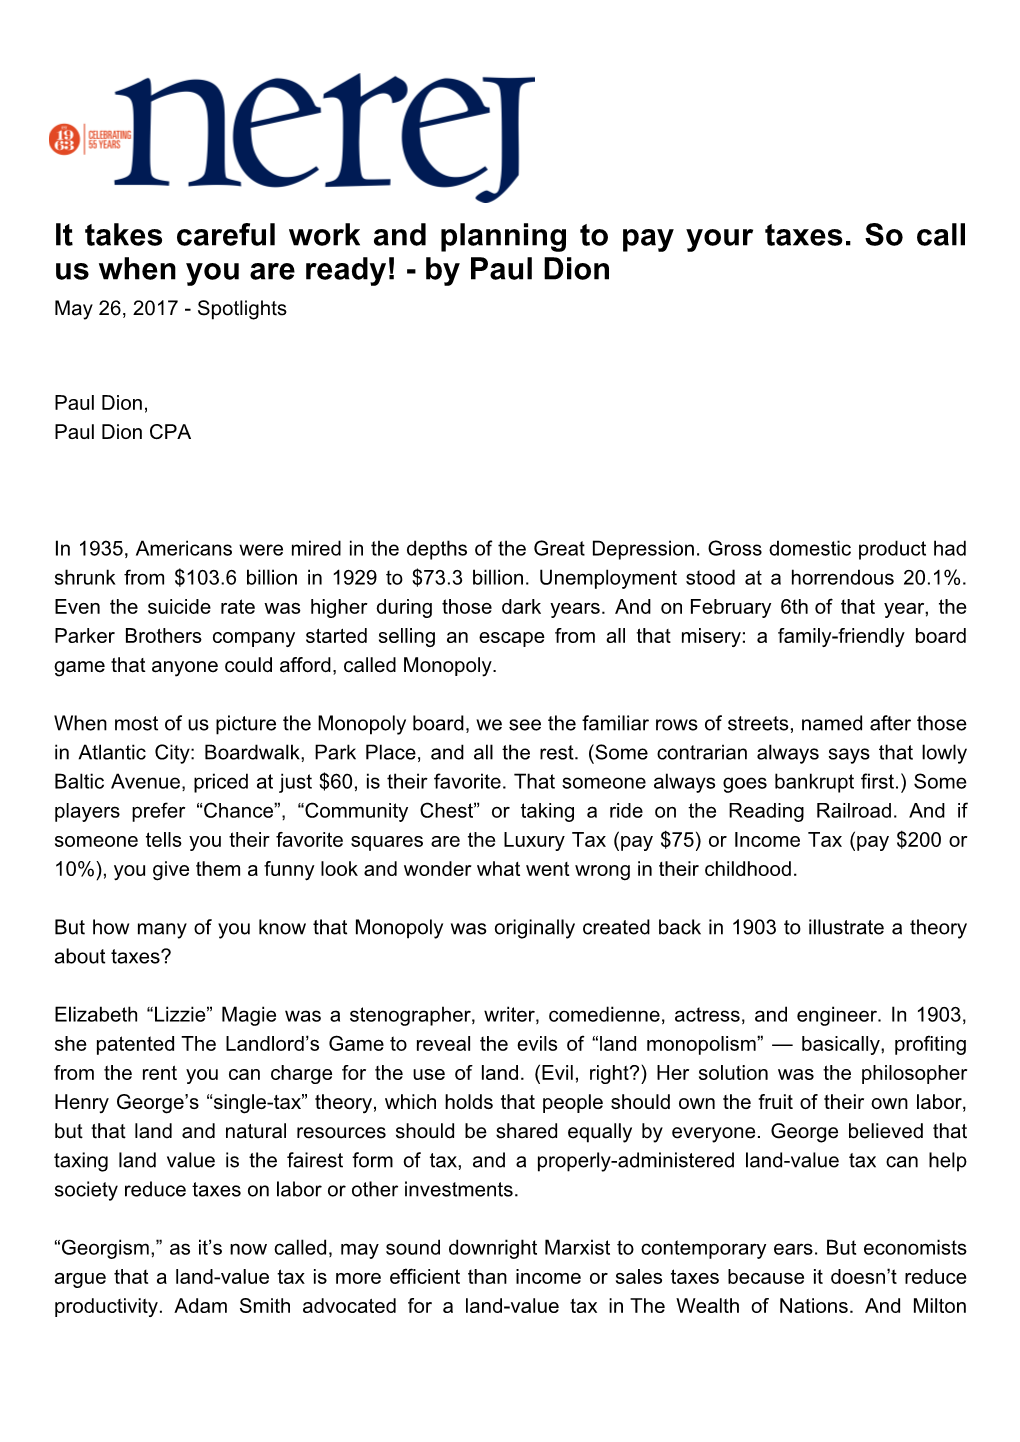 It Takes Careful Work and Planning to Pay Your Taxes. So Call Us When You Are Ready! - by Paul Dion May 26, 2017 - Spotlights